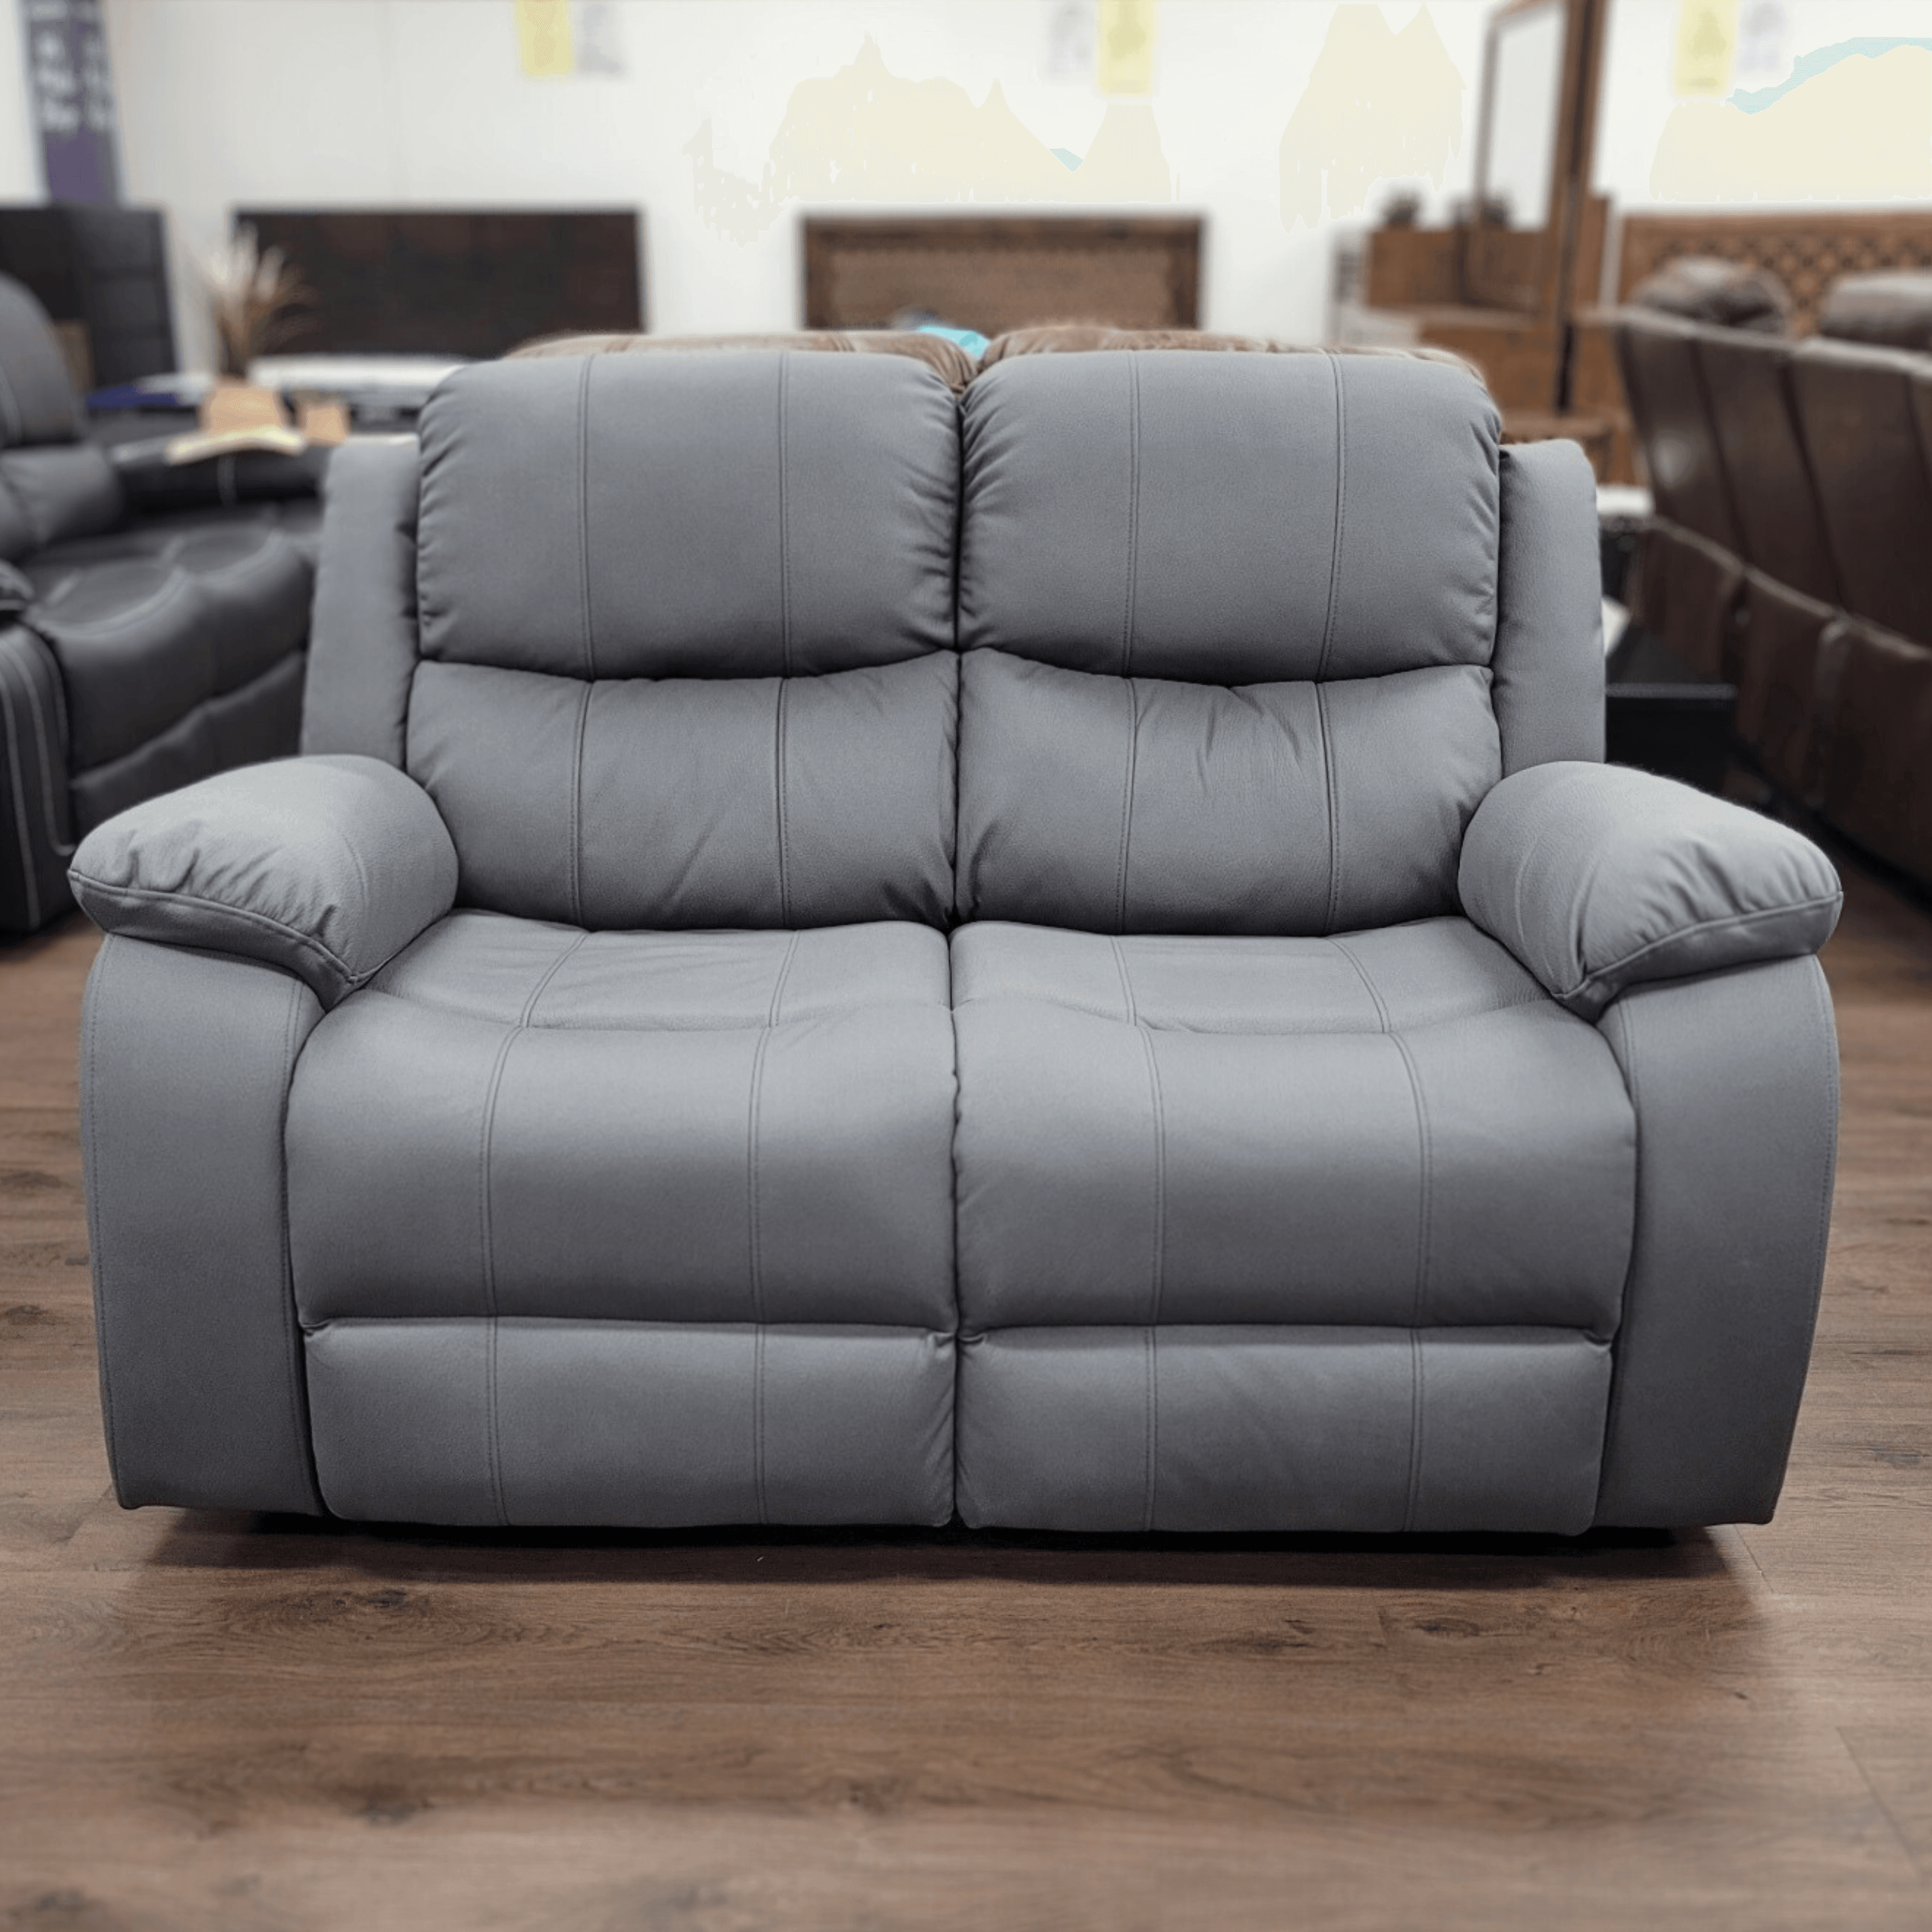 Bliss 2 Seater Recliner Lounge